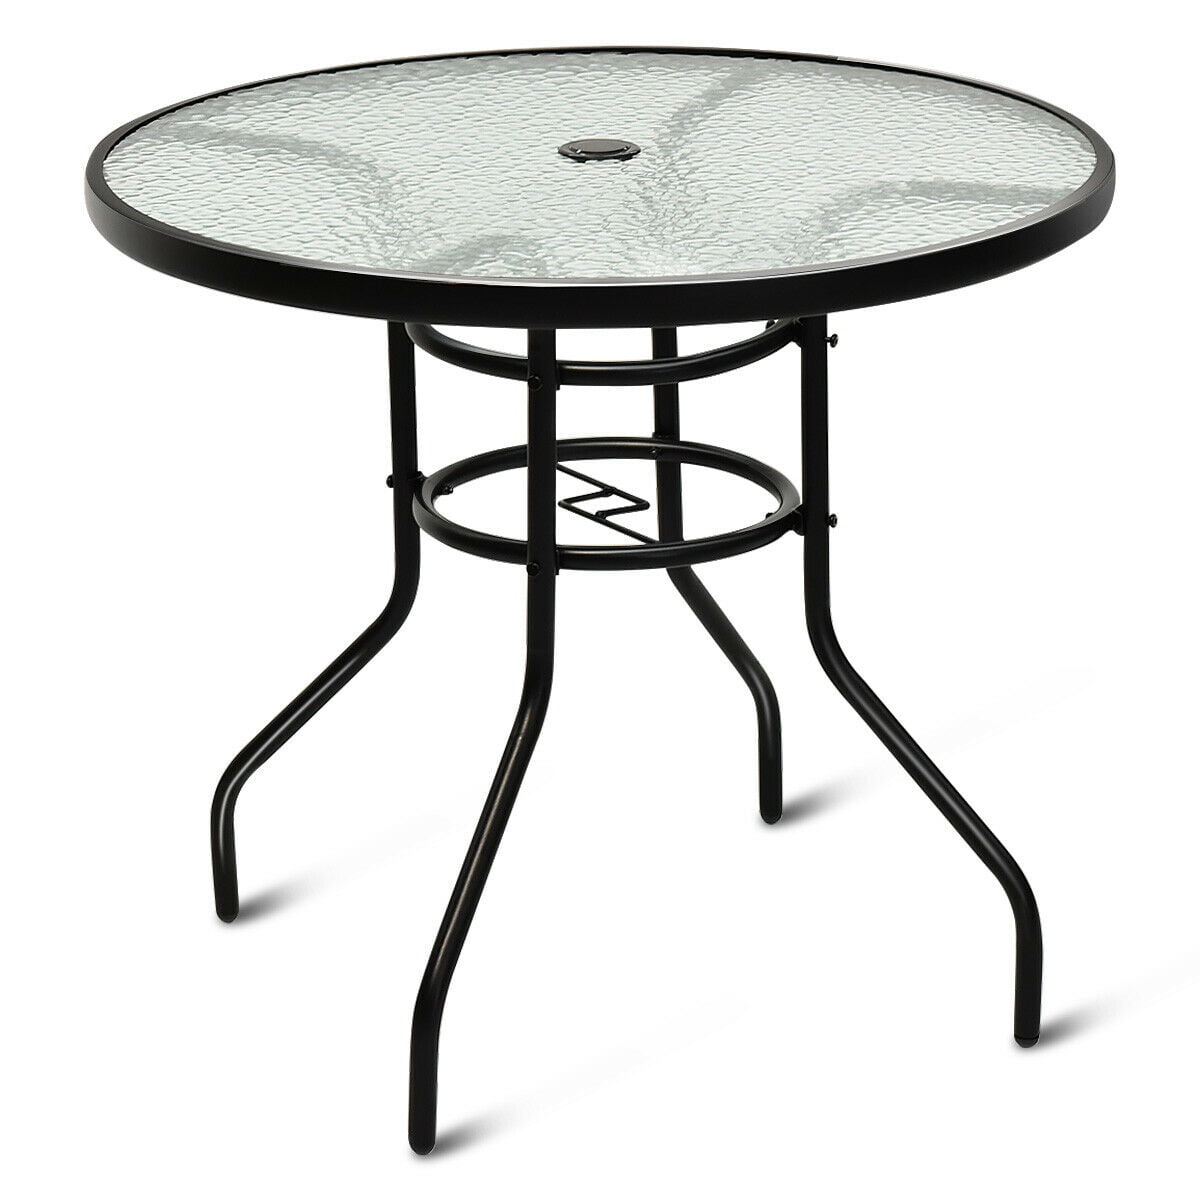 Round Outdoor Mosaic Table Small Garden Balcony Black White Coffee Bistro Tables 